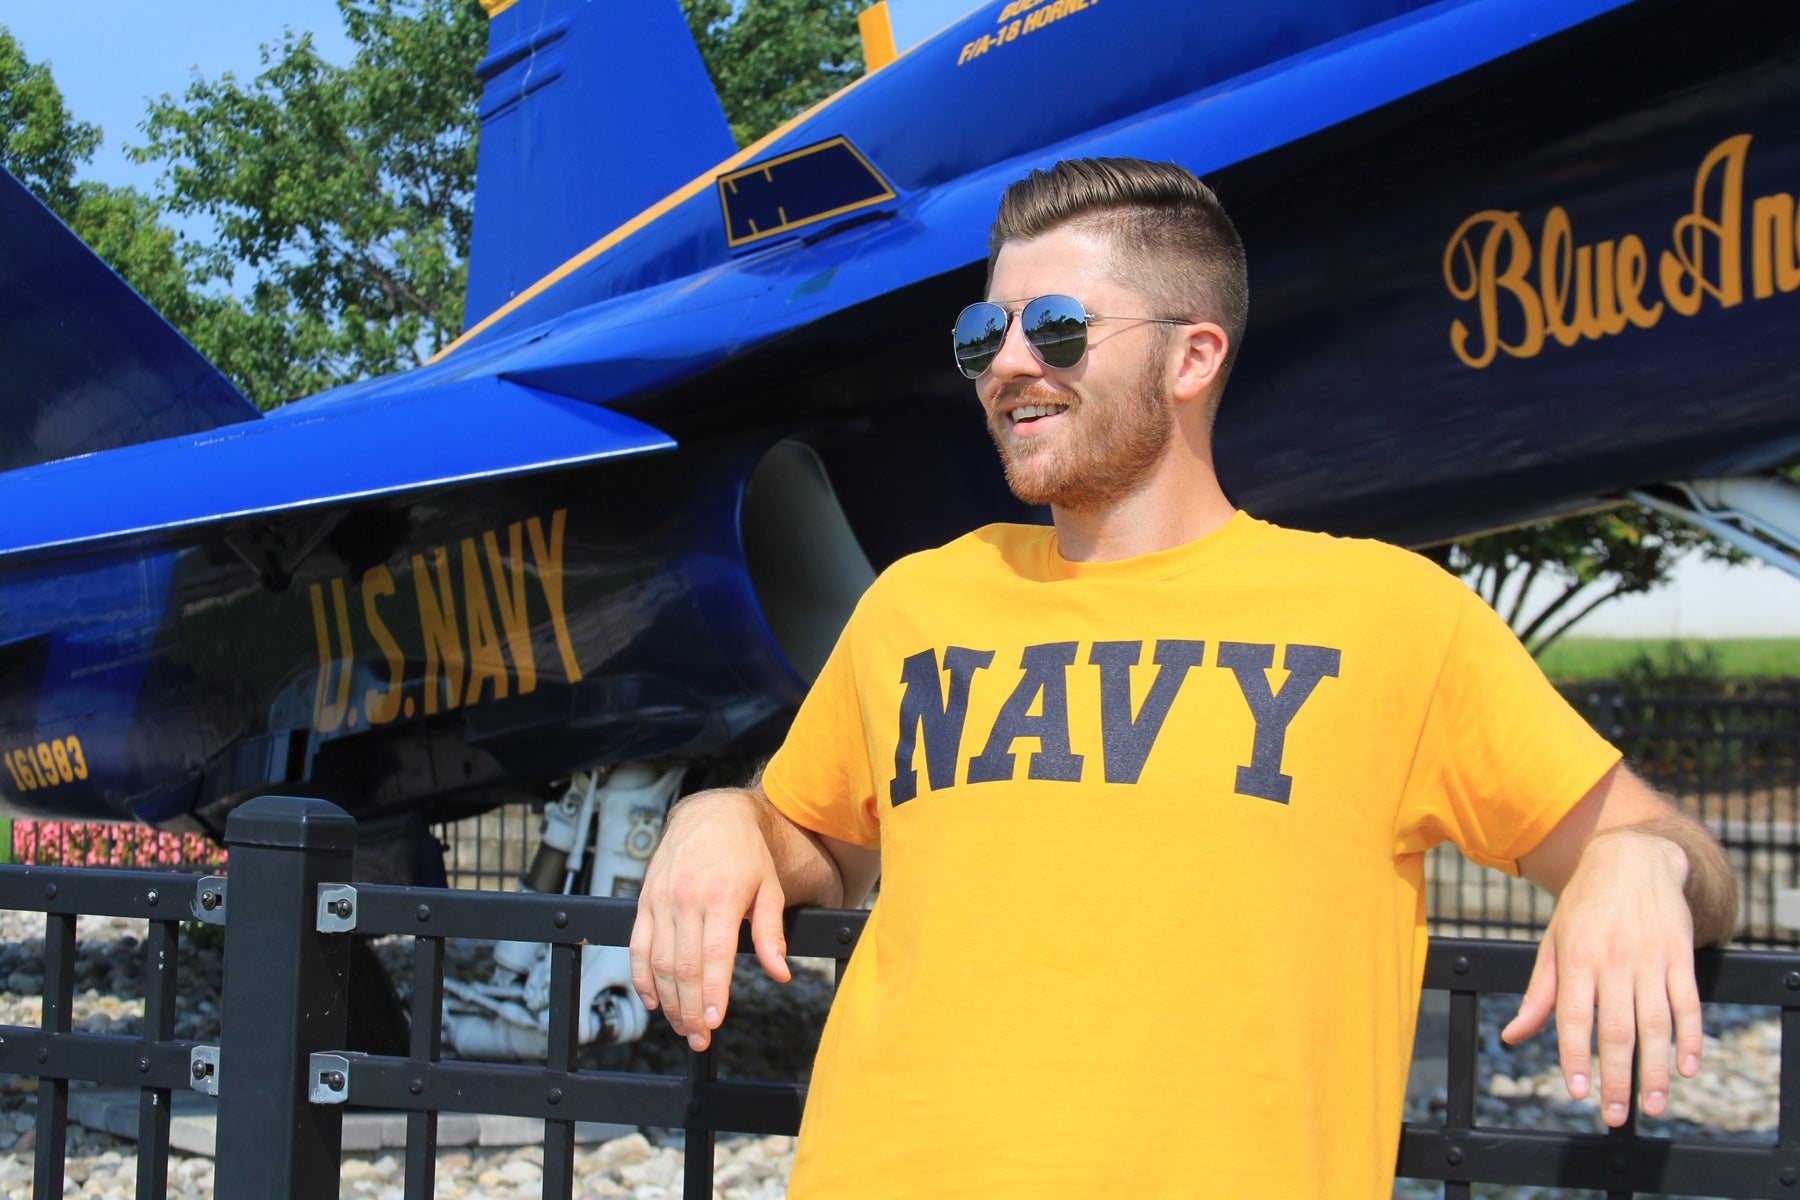 Officially Licensed - US Navy Football Jersey